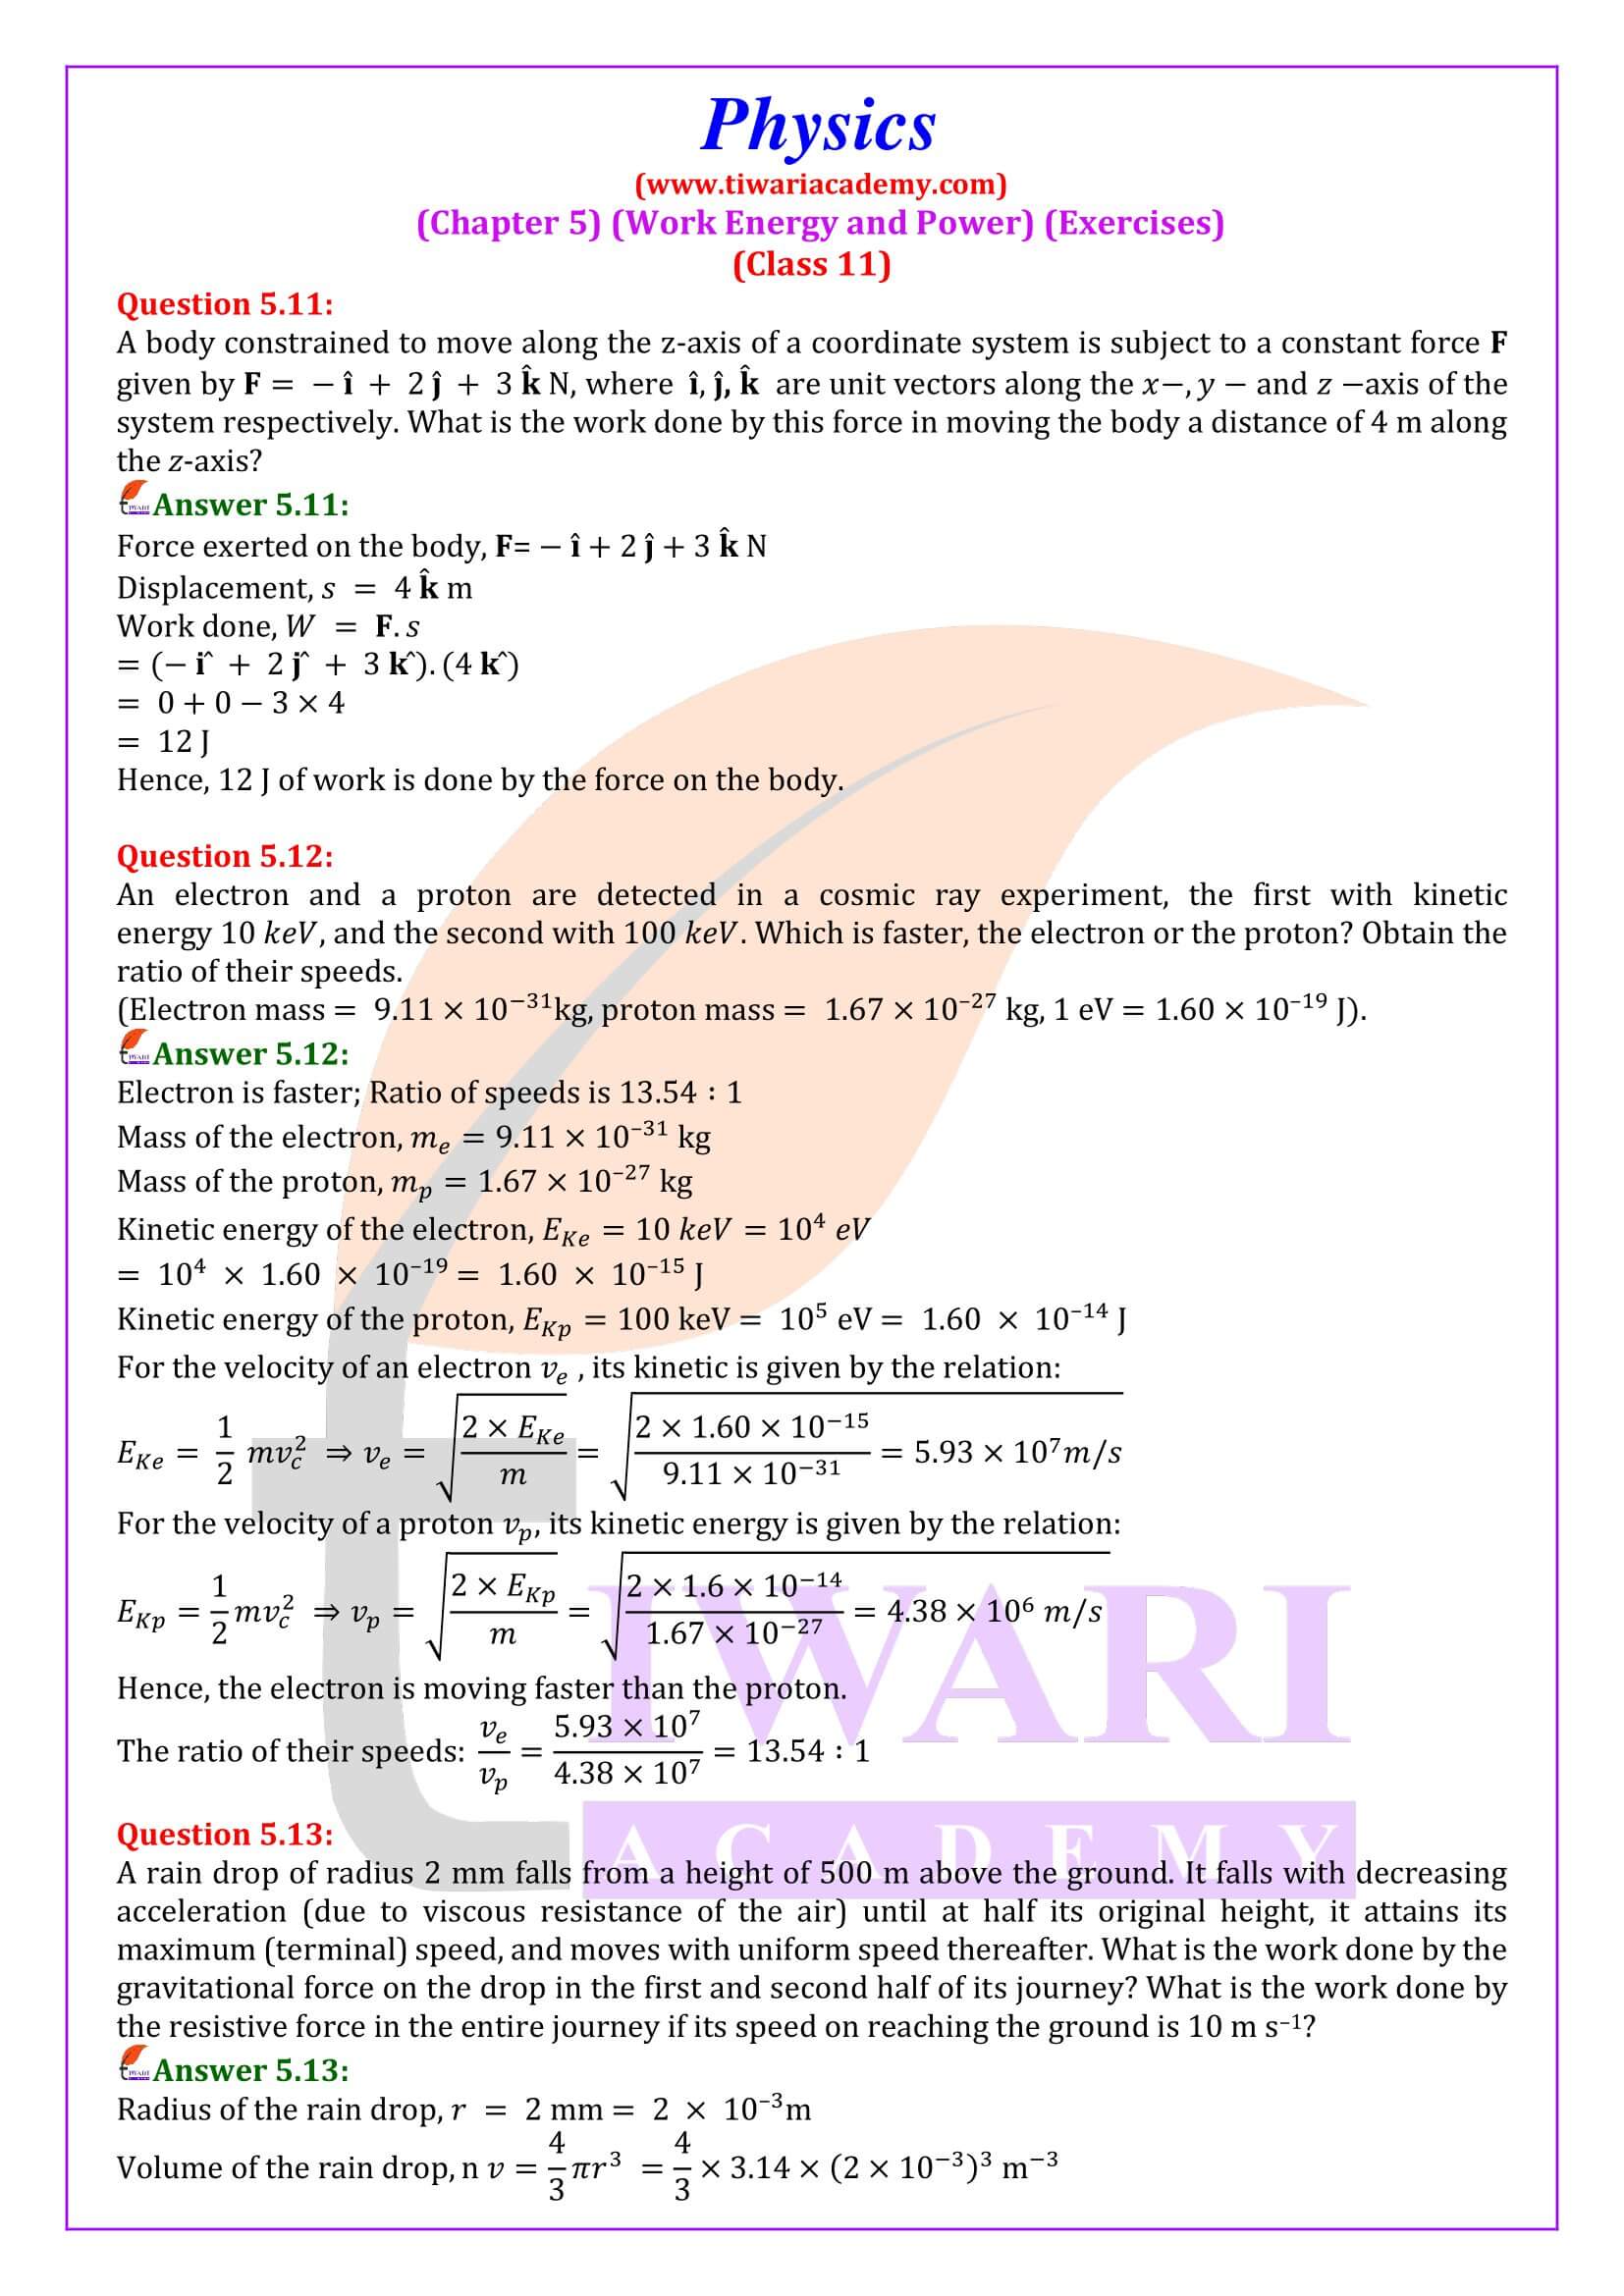 NCERT Solutions for Class 11 Physics Chapter 5 guide